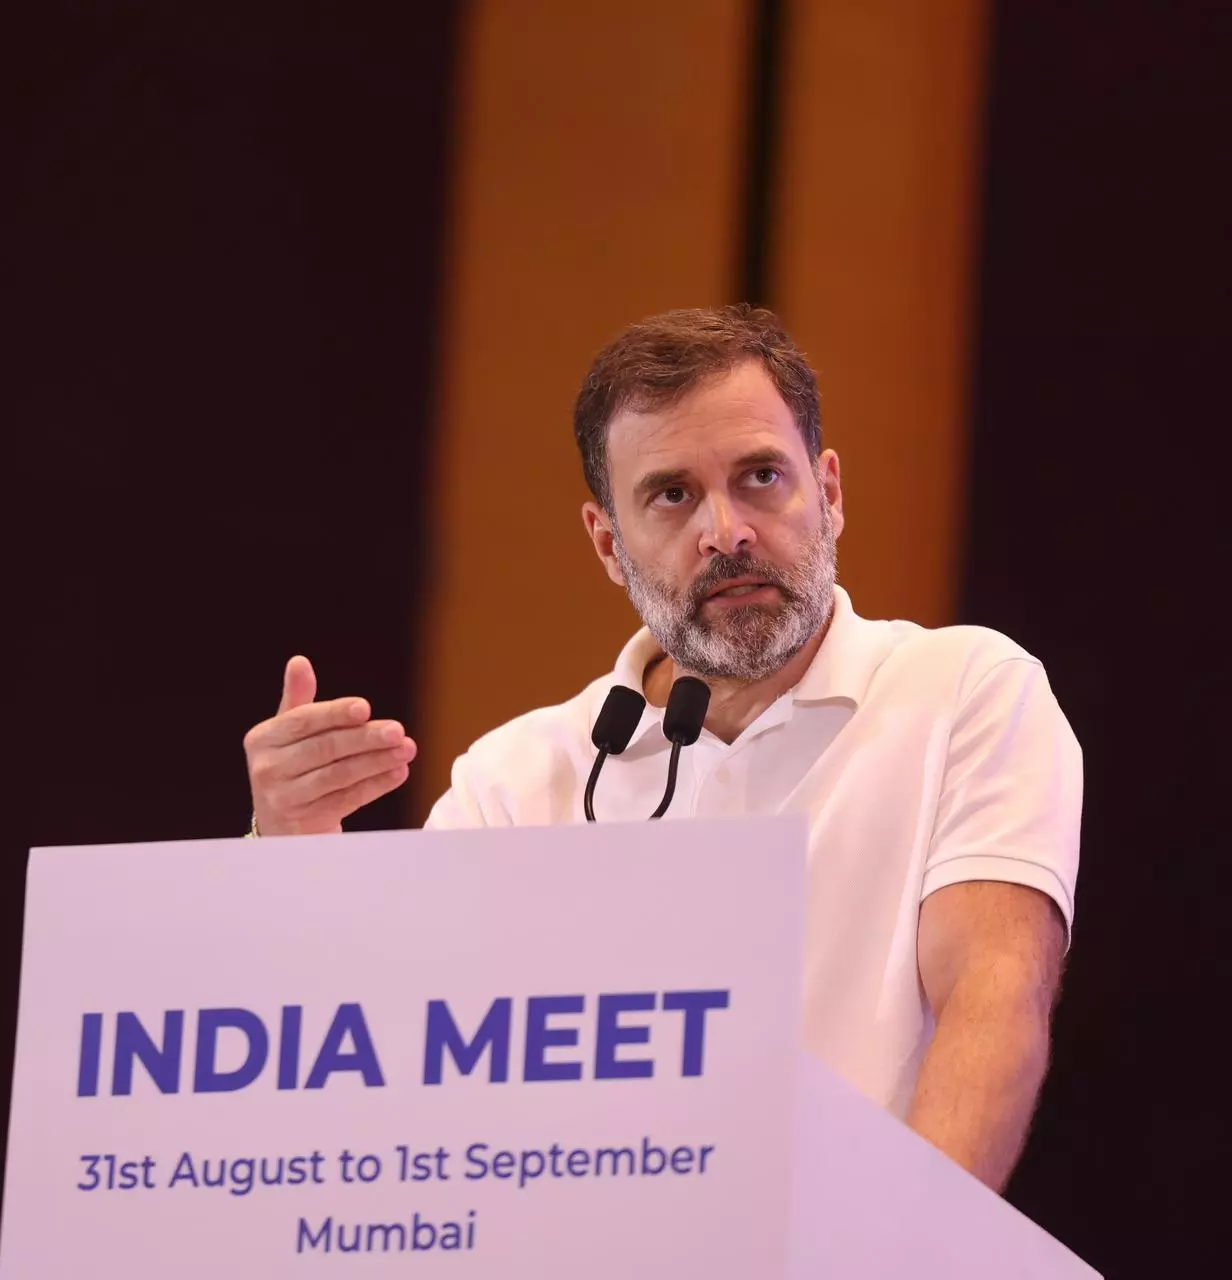 LIVE | Mumbai INDIA meet: If we unite, it will be impossible for BJP to win elections, says Rahul